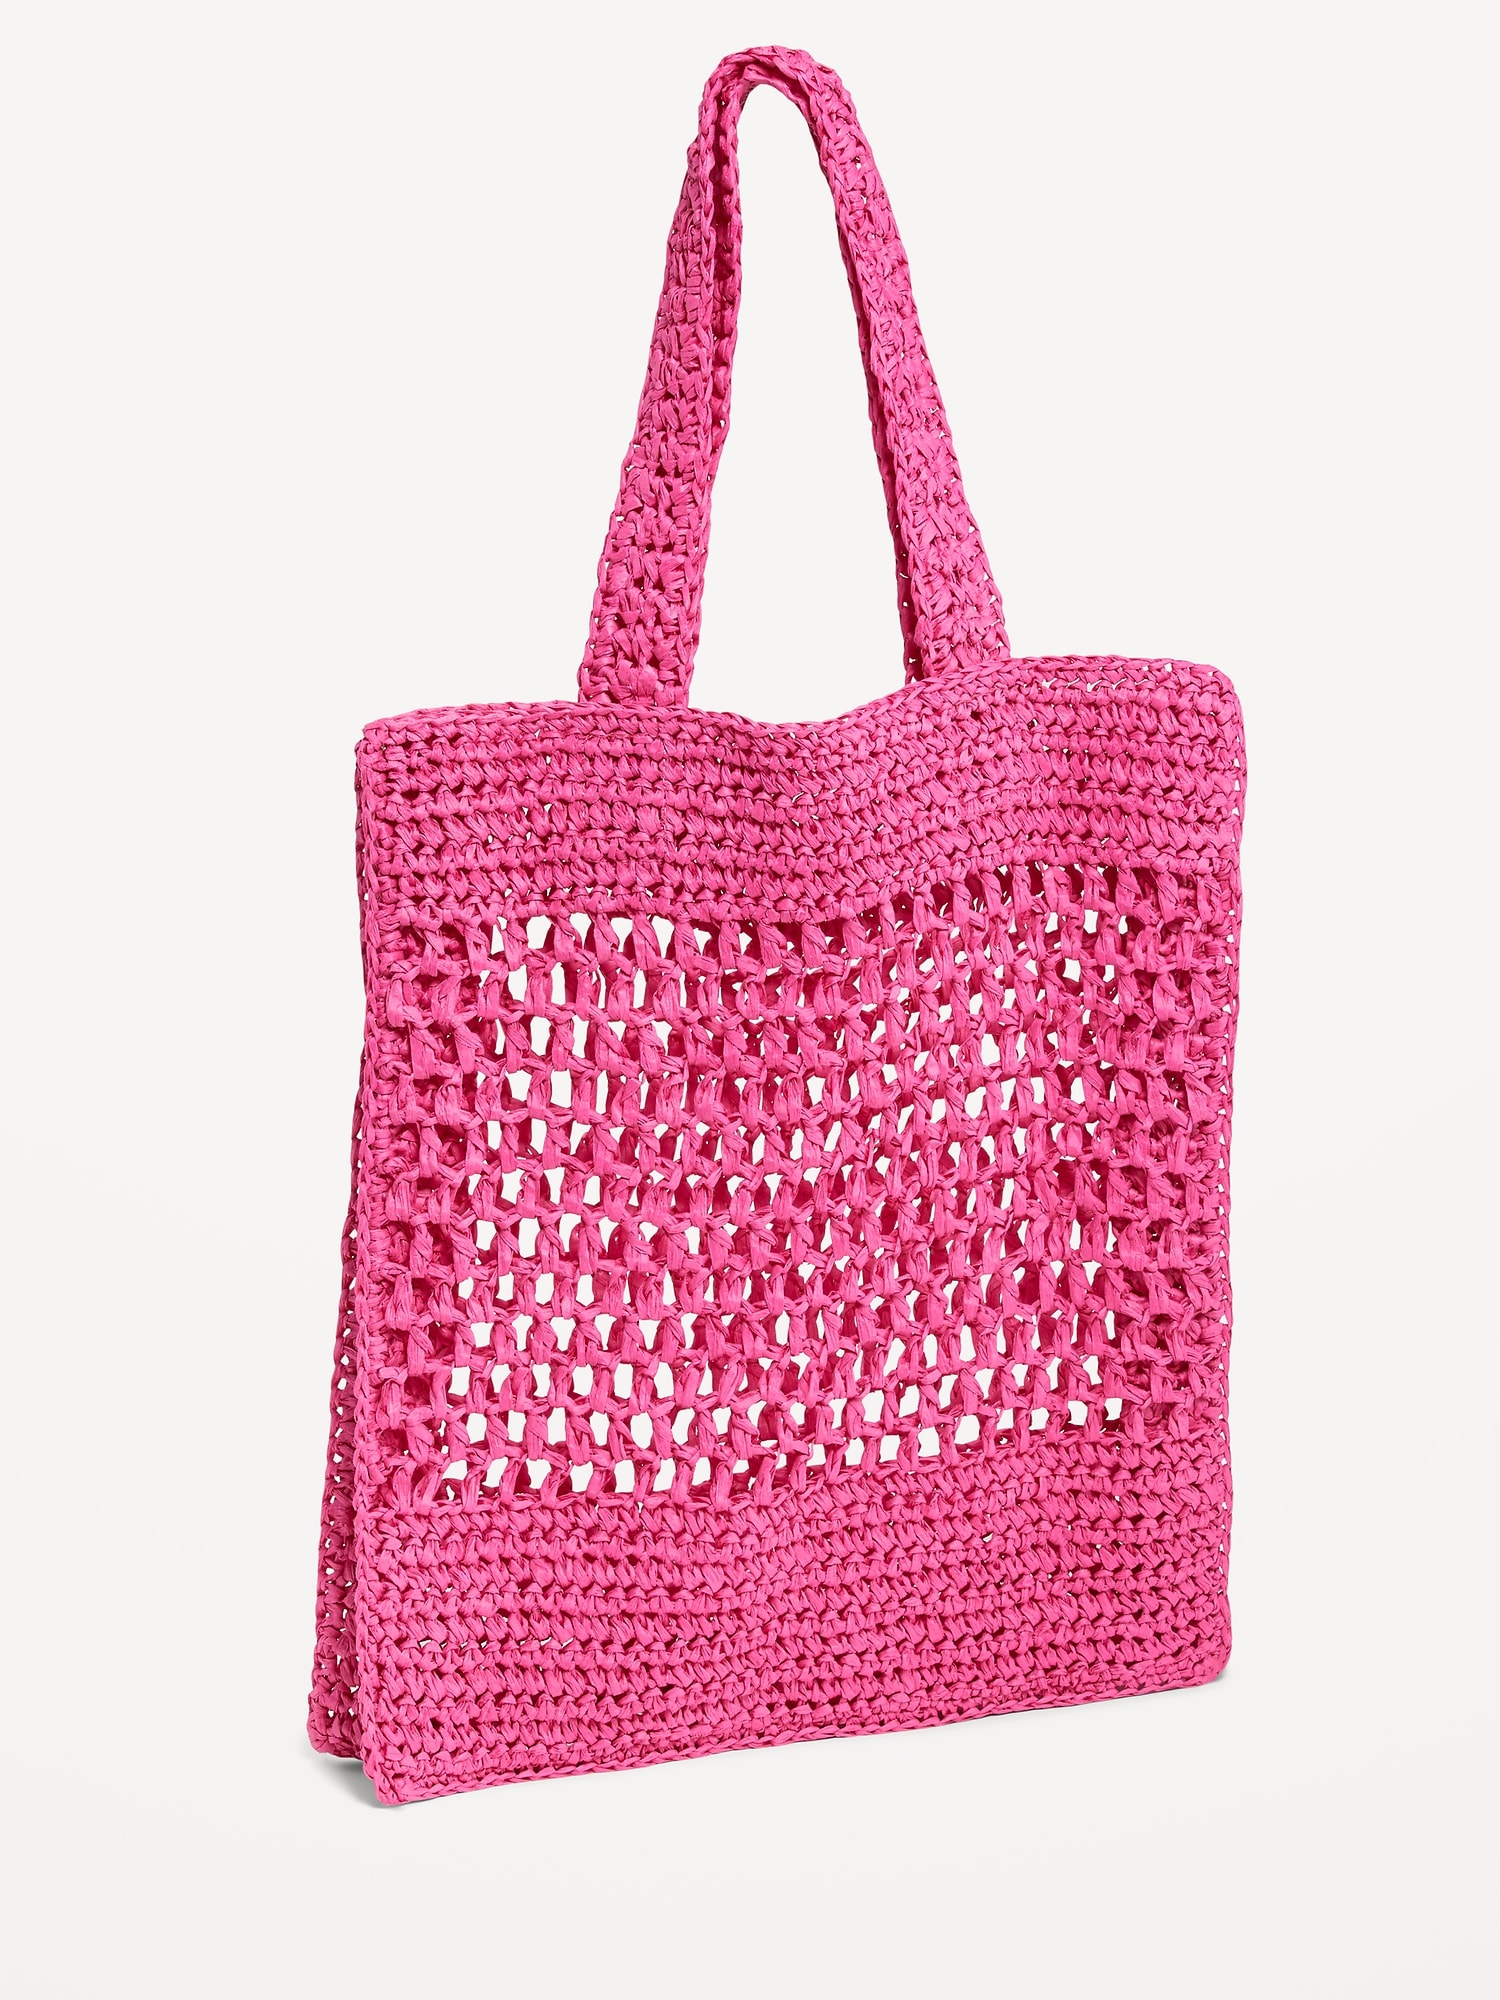 Old Navy Straw-Paper Crochet Tote Bag for Women pink. 1